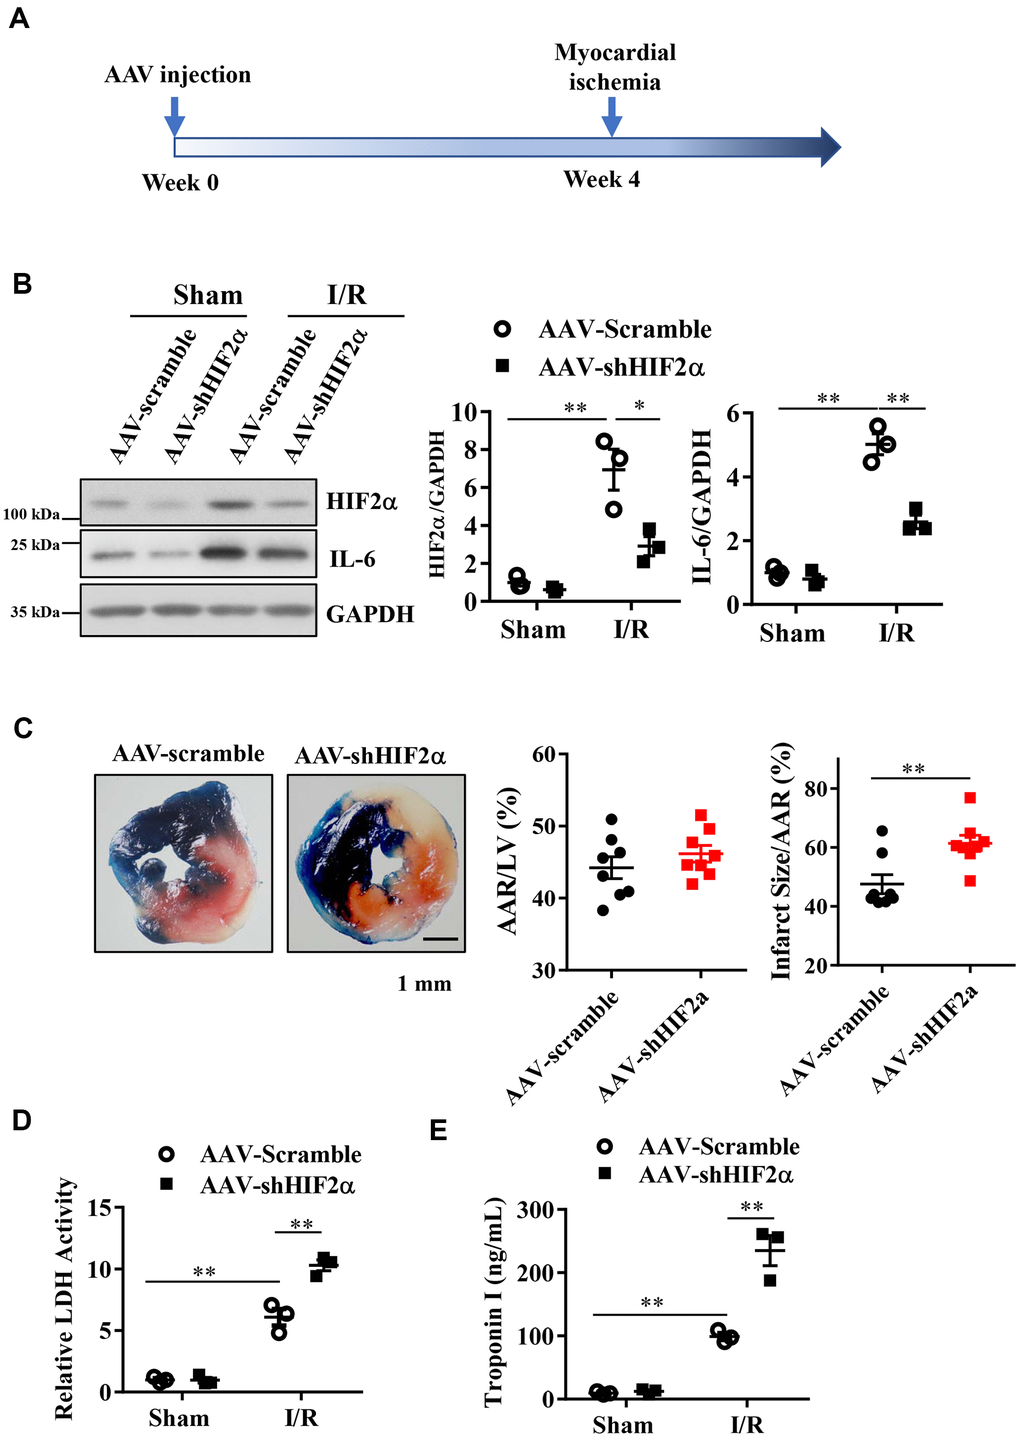 The effect of in vivo HIF2α knockdown on myocardial infarction during acute myocardial ischemia/reperfusion. (A) Myocardial I/R model was established 4 weeks after AAV injection. (B) Western blots were performed to examine the HIF2α and IL-6 protein expression after HIF2α knockdown in vivo. n = 3 per group. (C) TTC and Evans blue staining after mouse heart I/R. n = 8 per group. (D) Effect of HIF2α knockdown on myocardial LDH release subsequent to I/R. n = 5 per group. (E) Effect of HIF2α knockdown on myocardial TnI release subsequent to I/R. n = 5 per group. Data represent the mean ± SEM. **P